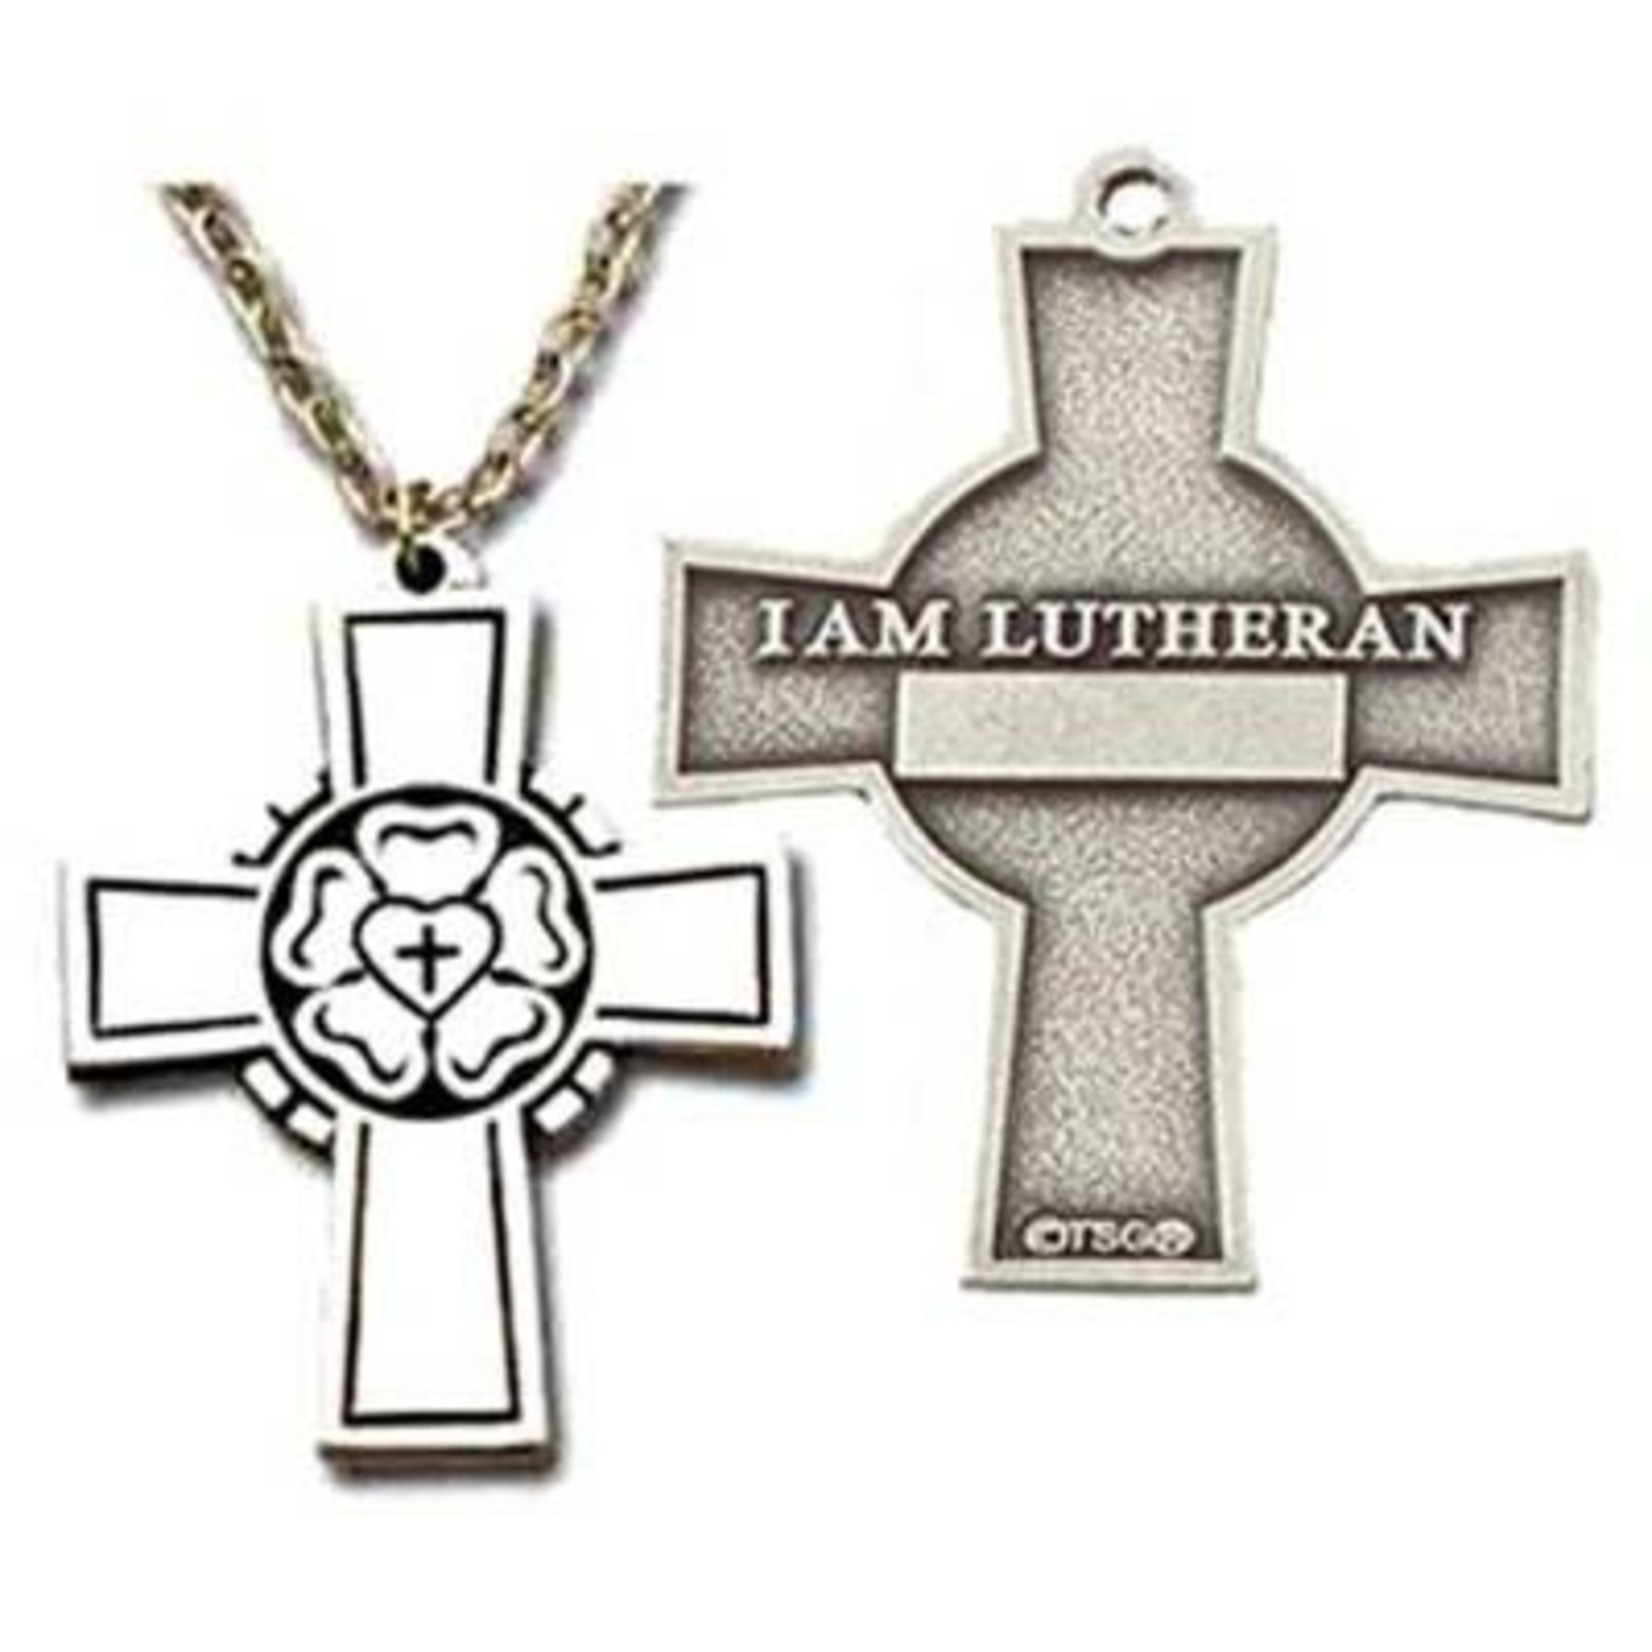 Luther's Rose/I Am Lutheran Cross Pendant